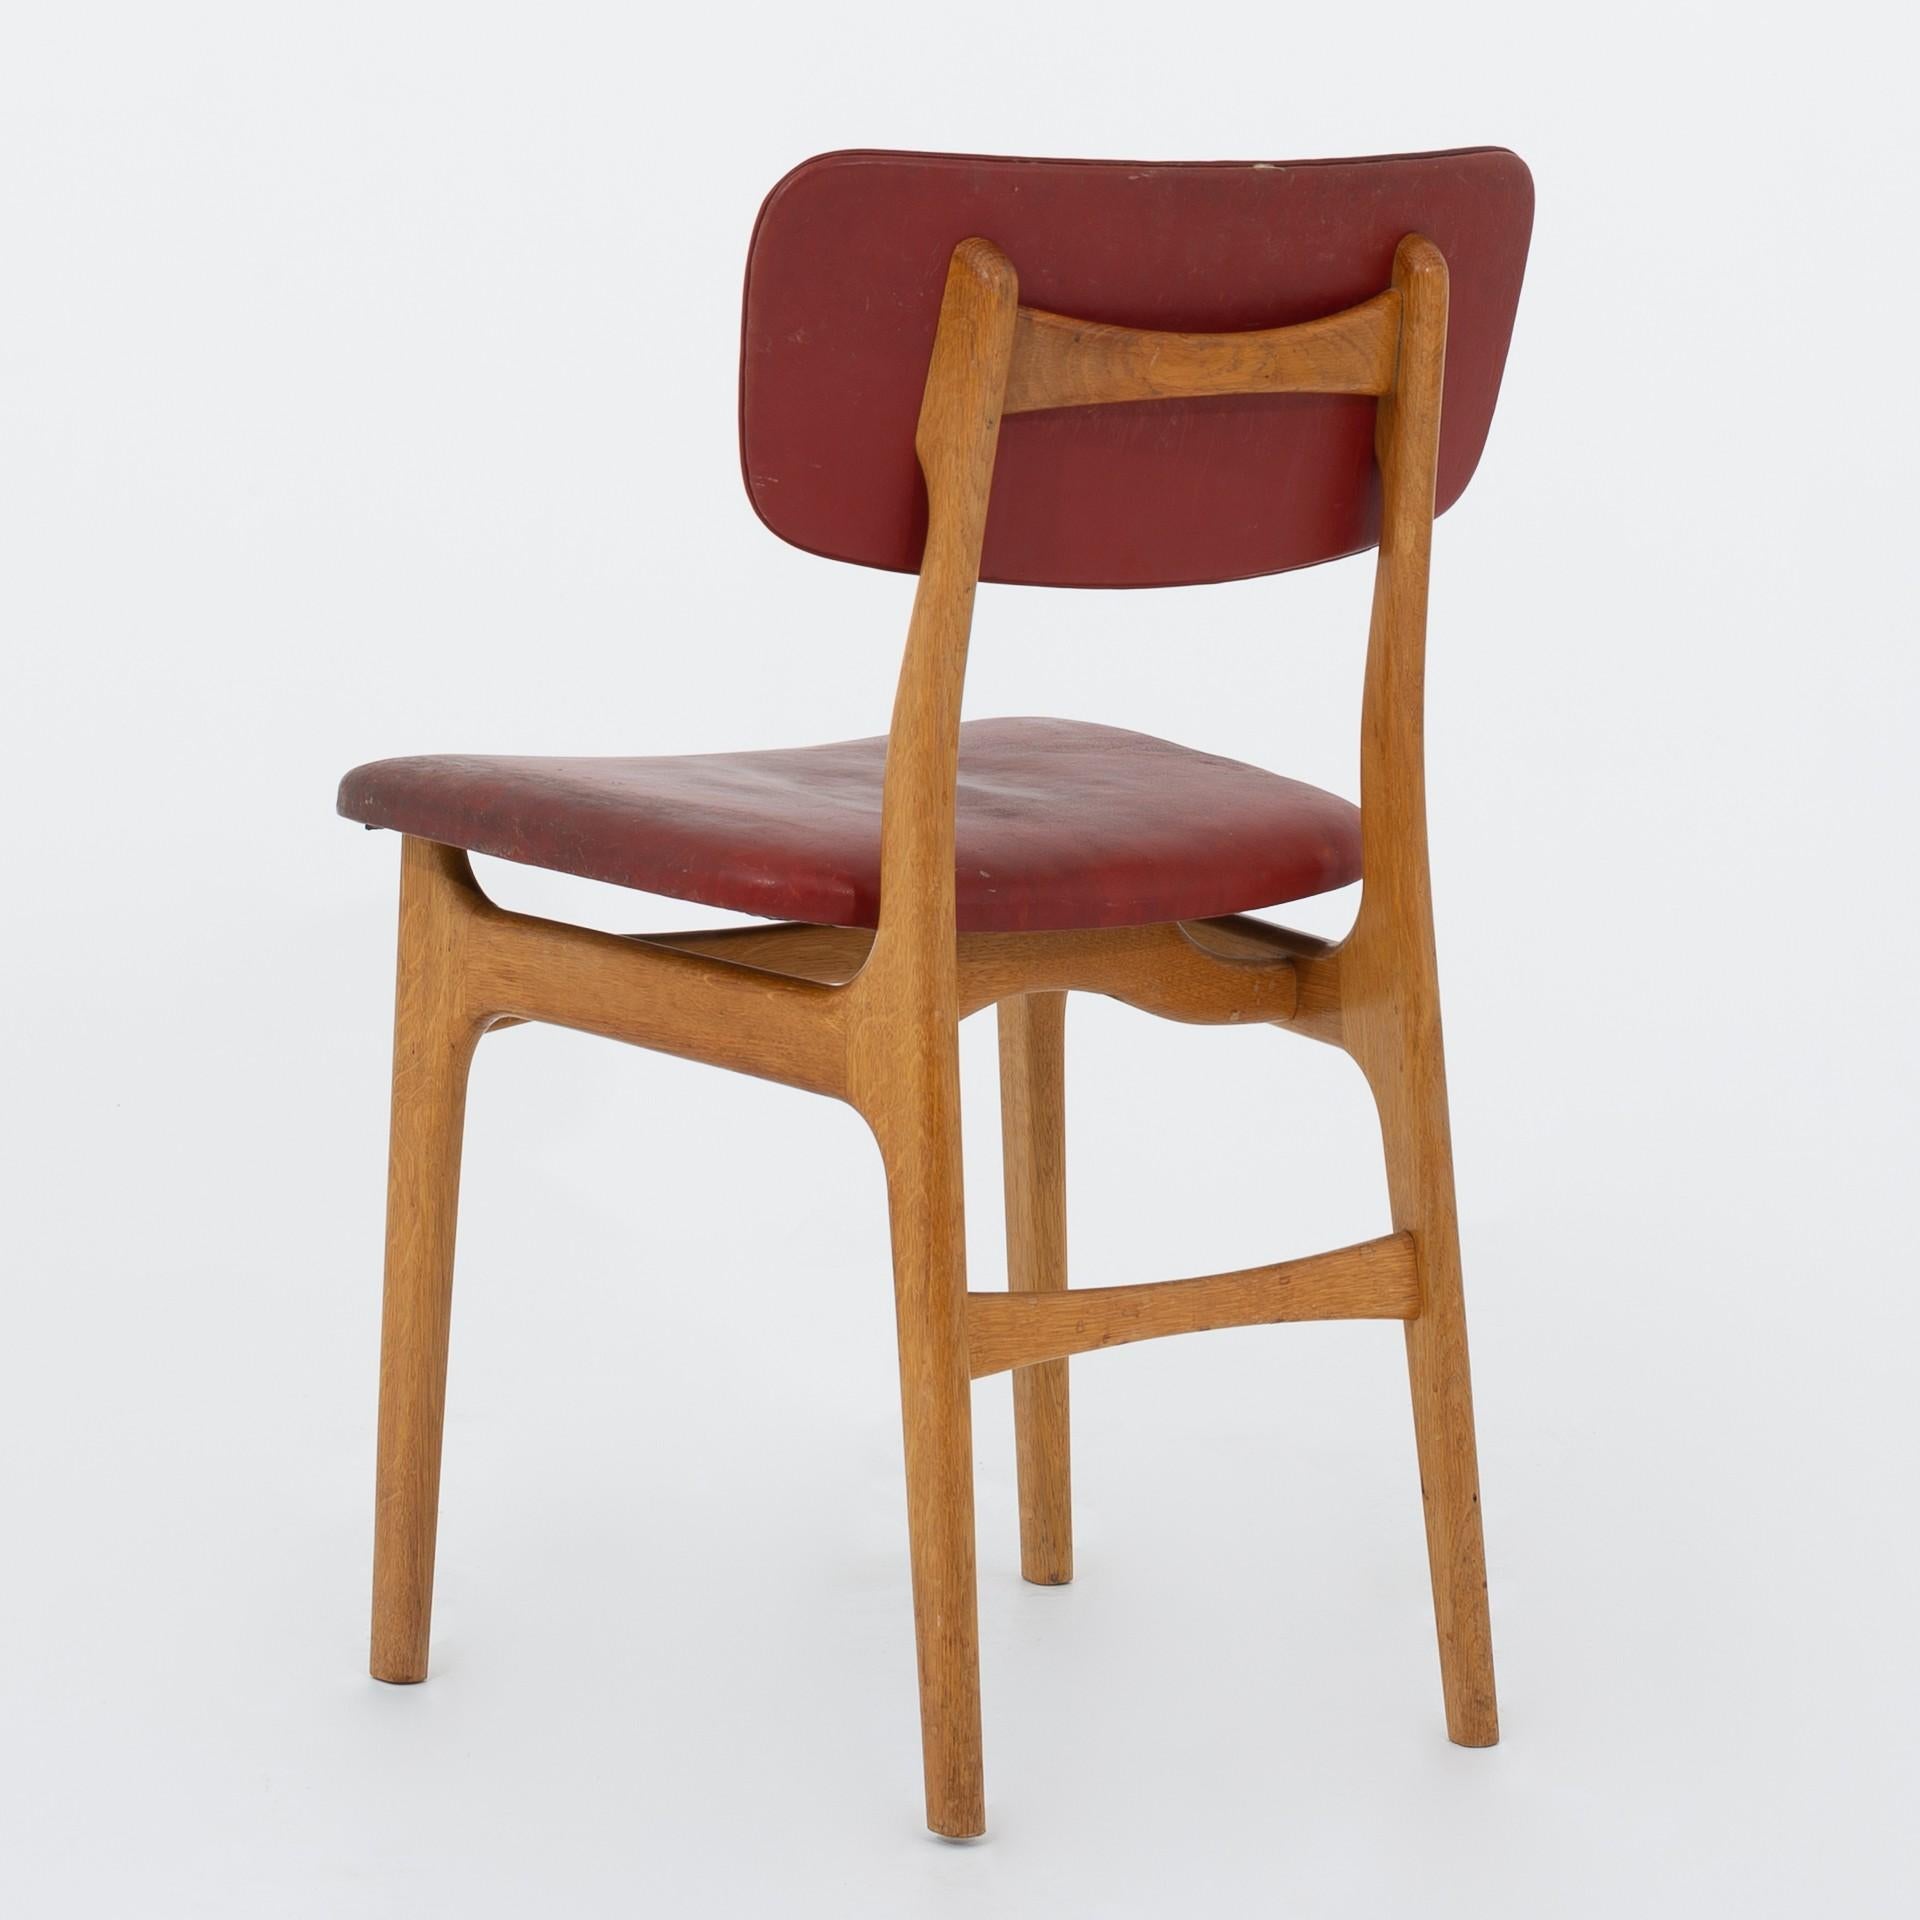 Eight dining chairs in oak and patinated red leather. Maker Gustav Bertelsen.